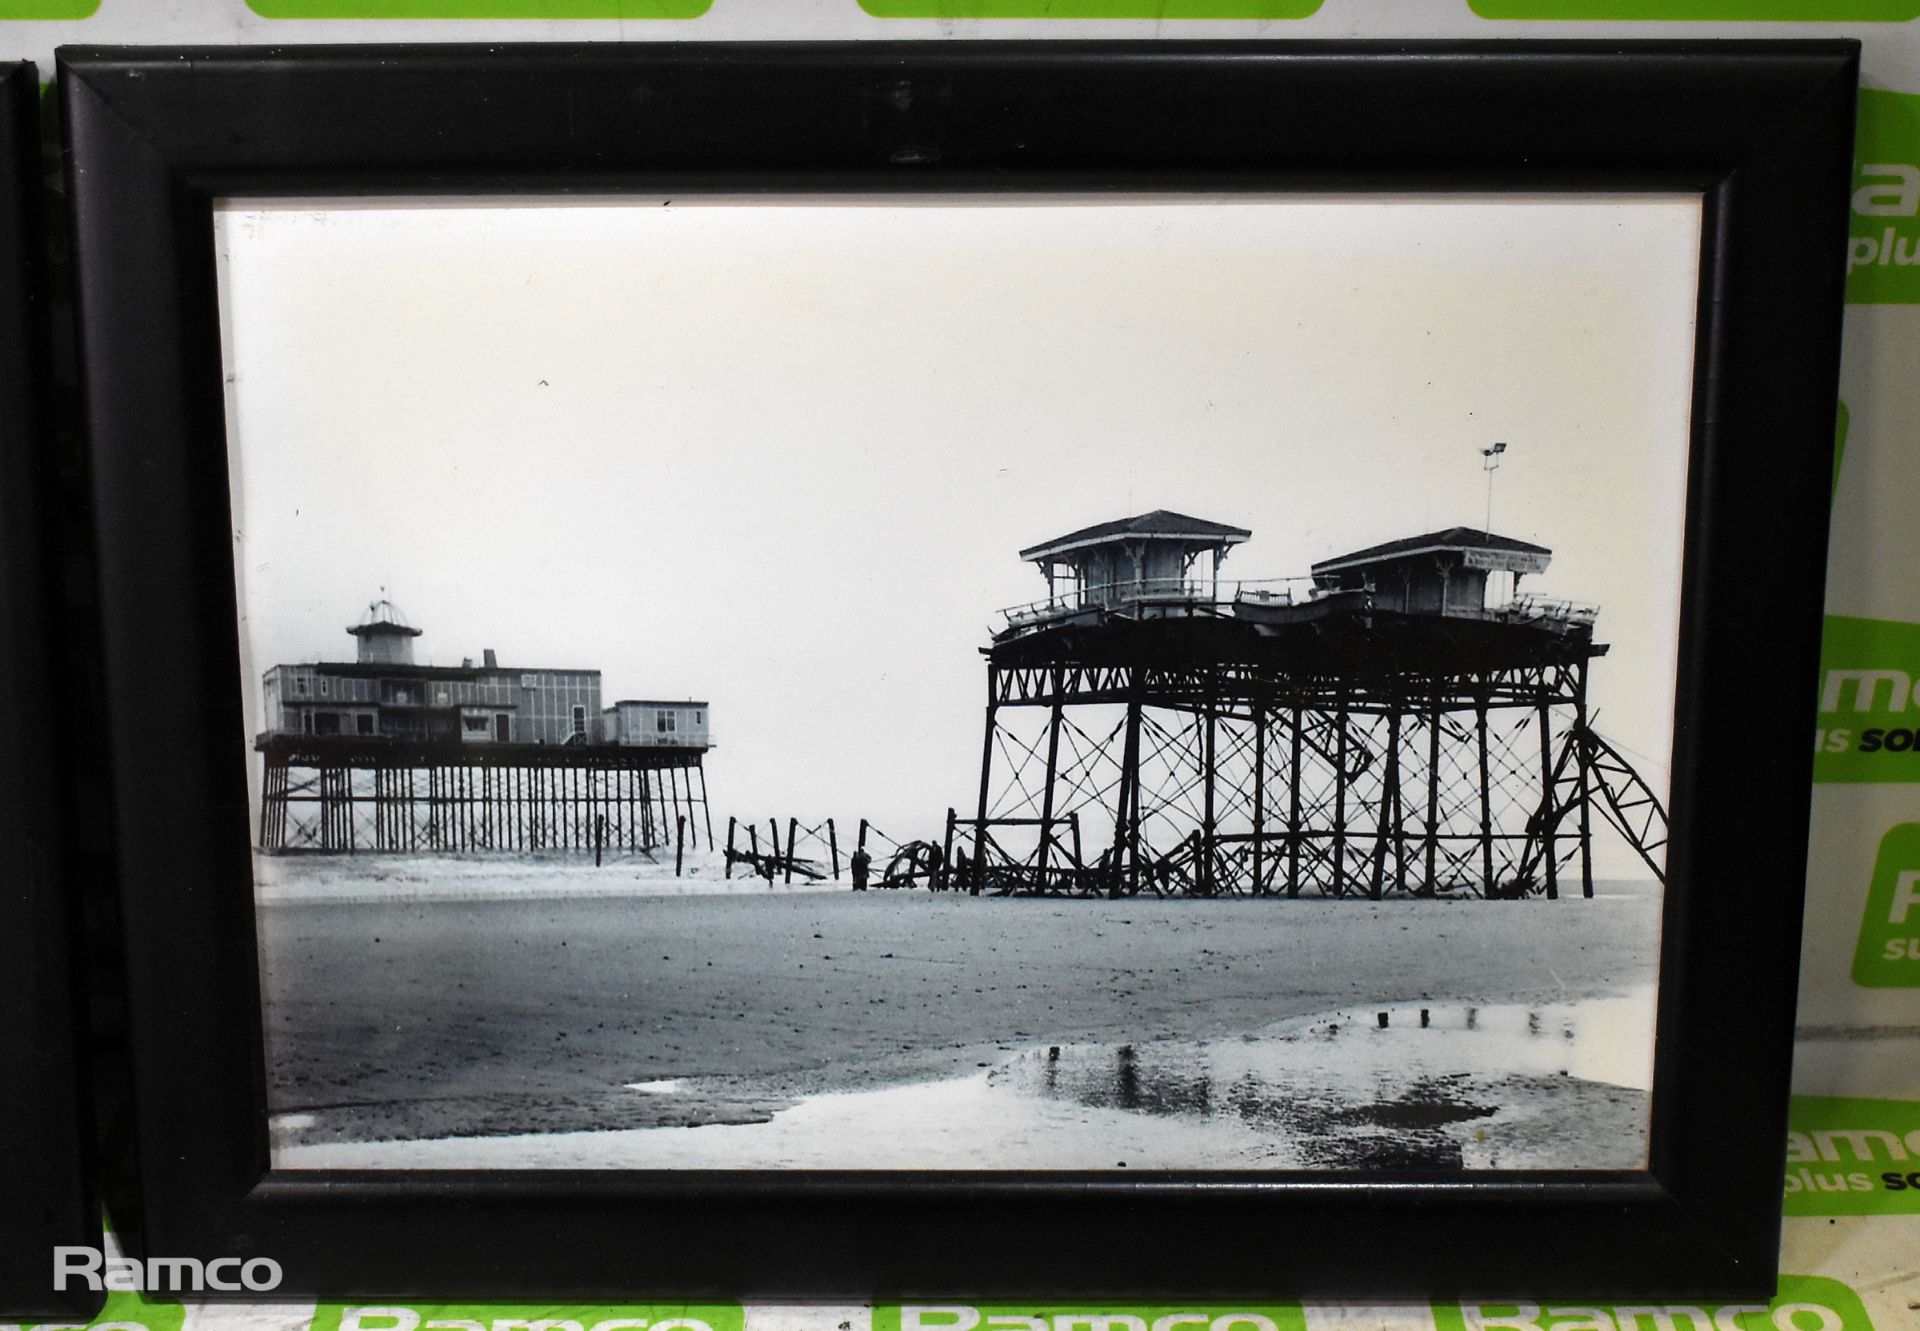 6x Skegness memorabilia photos - North Shore Golf Links, The Golf Links, H.Randall, Clement's, - Image 5 of 7